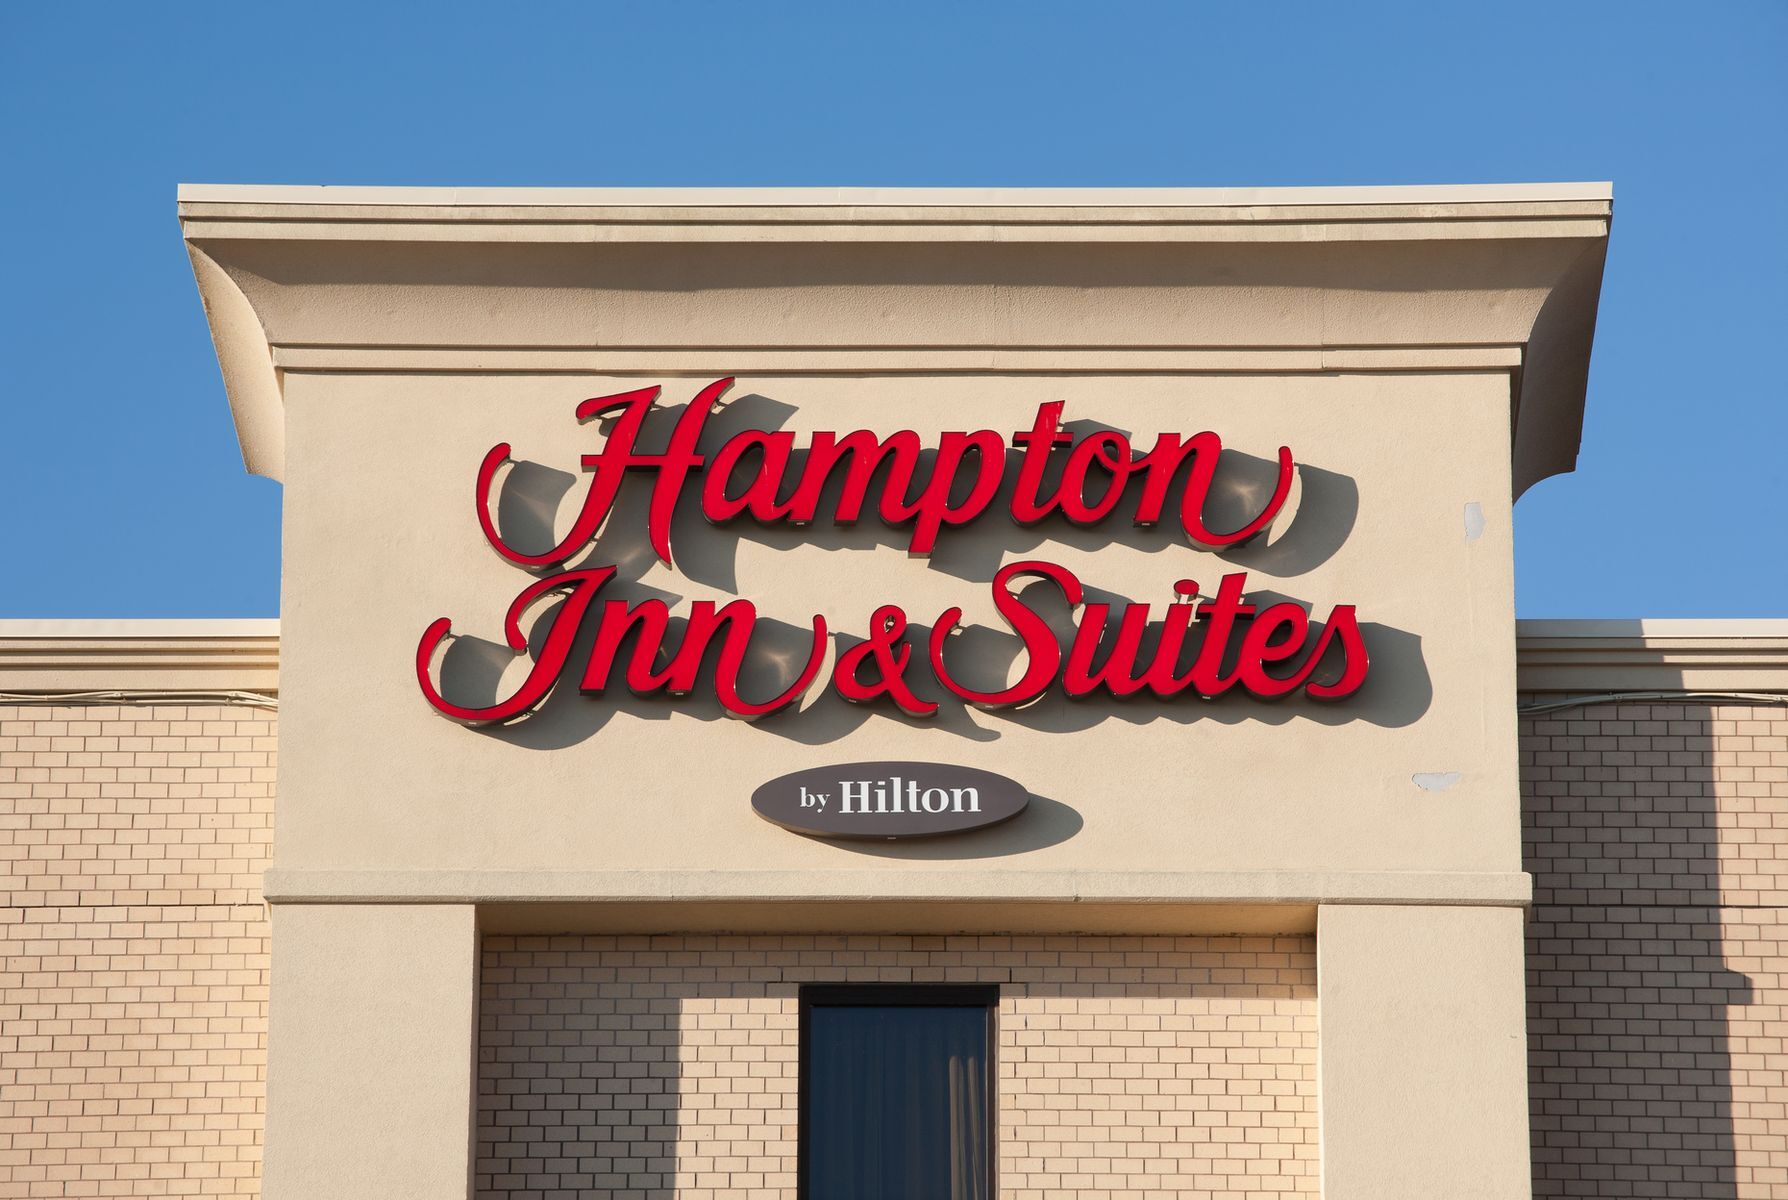 <p>Originally, Hampton was part of the Holiday Inn family before being <a href="https://ir.hilton.com/~/media/Files/H/Hilton-Worldwide-IR-V3/annual-report/1999-Annual-Report-Page-3-Removed.pdf">purchased by Hilton</a> in 1999 for US$3.7 billion. The organization now operates as a middle-market offering from parent company Hilton Worldwide, generally known for their more extravagant hotels. As an example of the differences, Hilton hotels typically offer luxury onsite restaurants, while Hampton hotels instead feed their guests with complimentary breakfasts—a cozy service that Hilton doesn’t offer within the United States.</p>